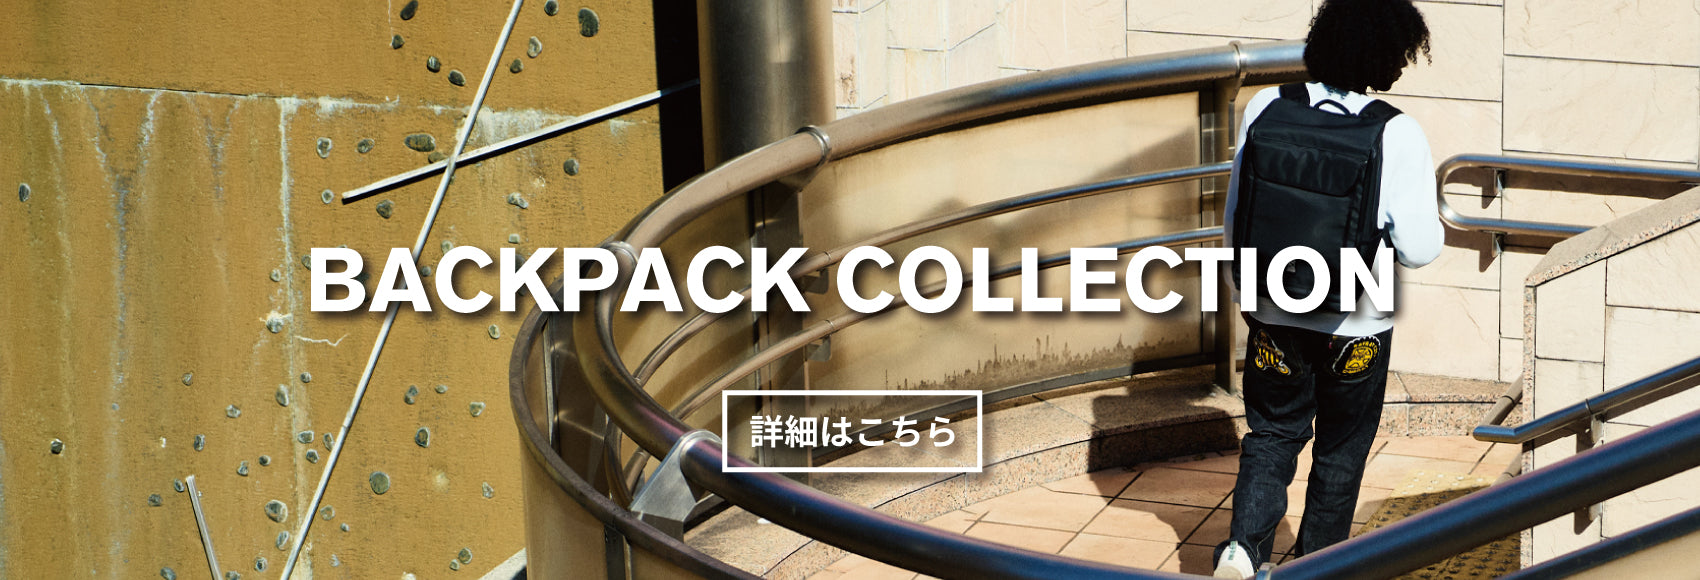 BACKPACK COLLECTION